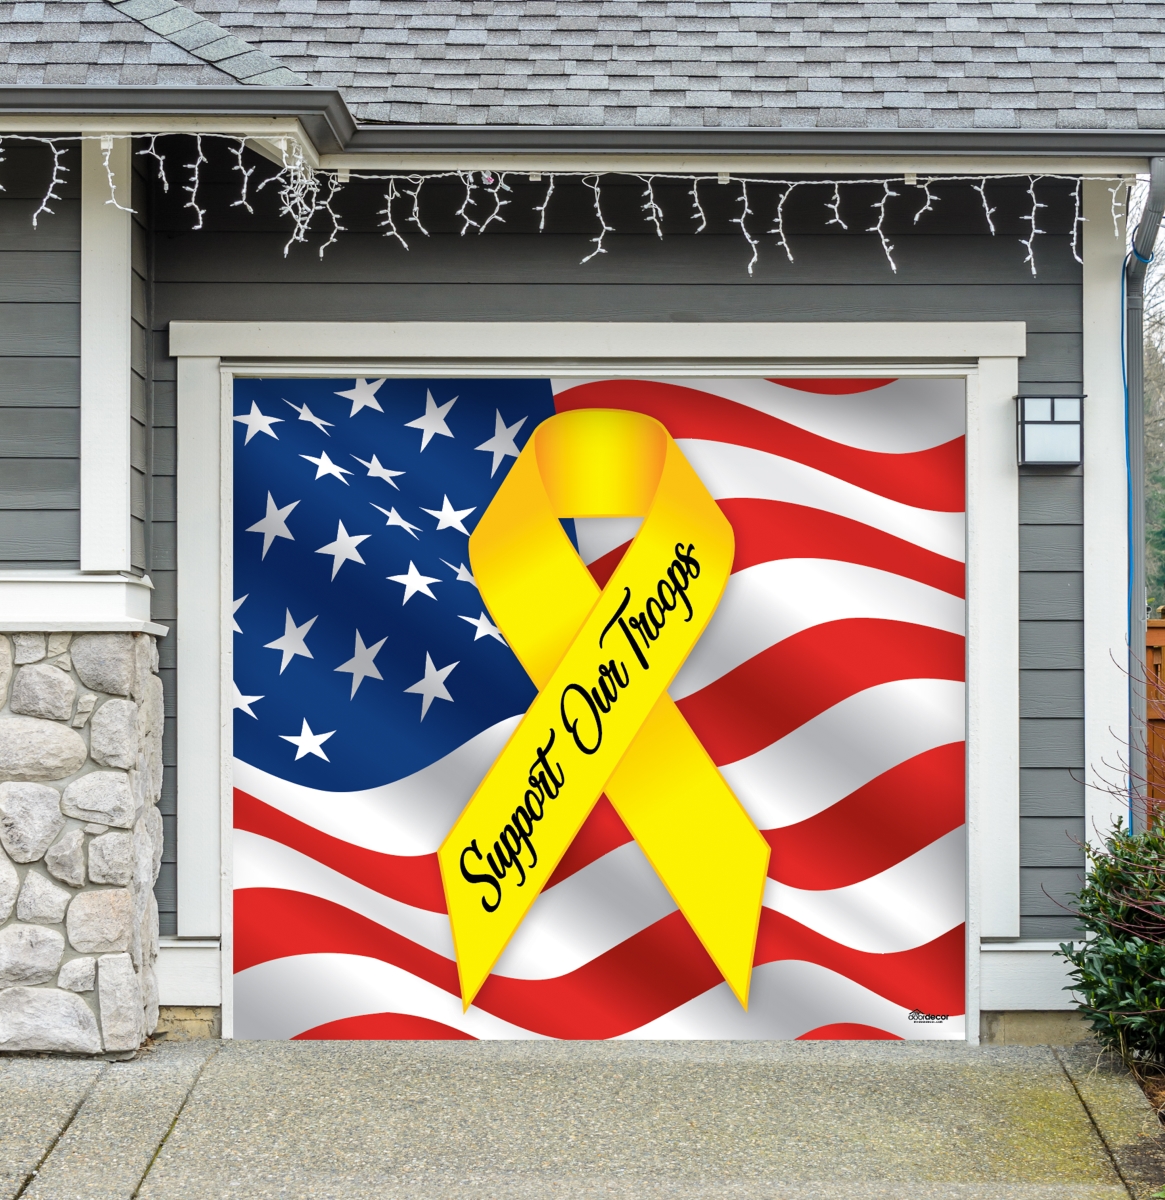 285903patr-015 7 X 8 Ft. Support Our Troops Patriotic Holiday Door Mural Sign Car Garage Banner Decor, Multi Color